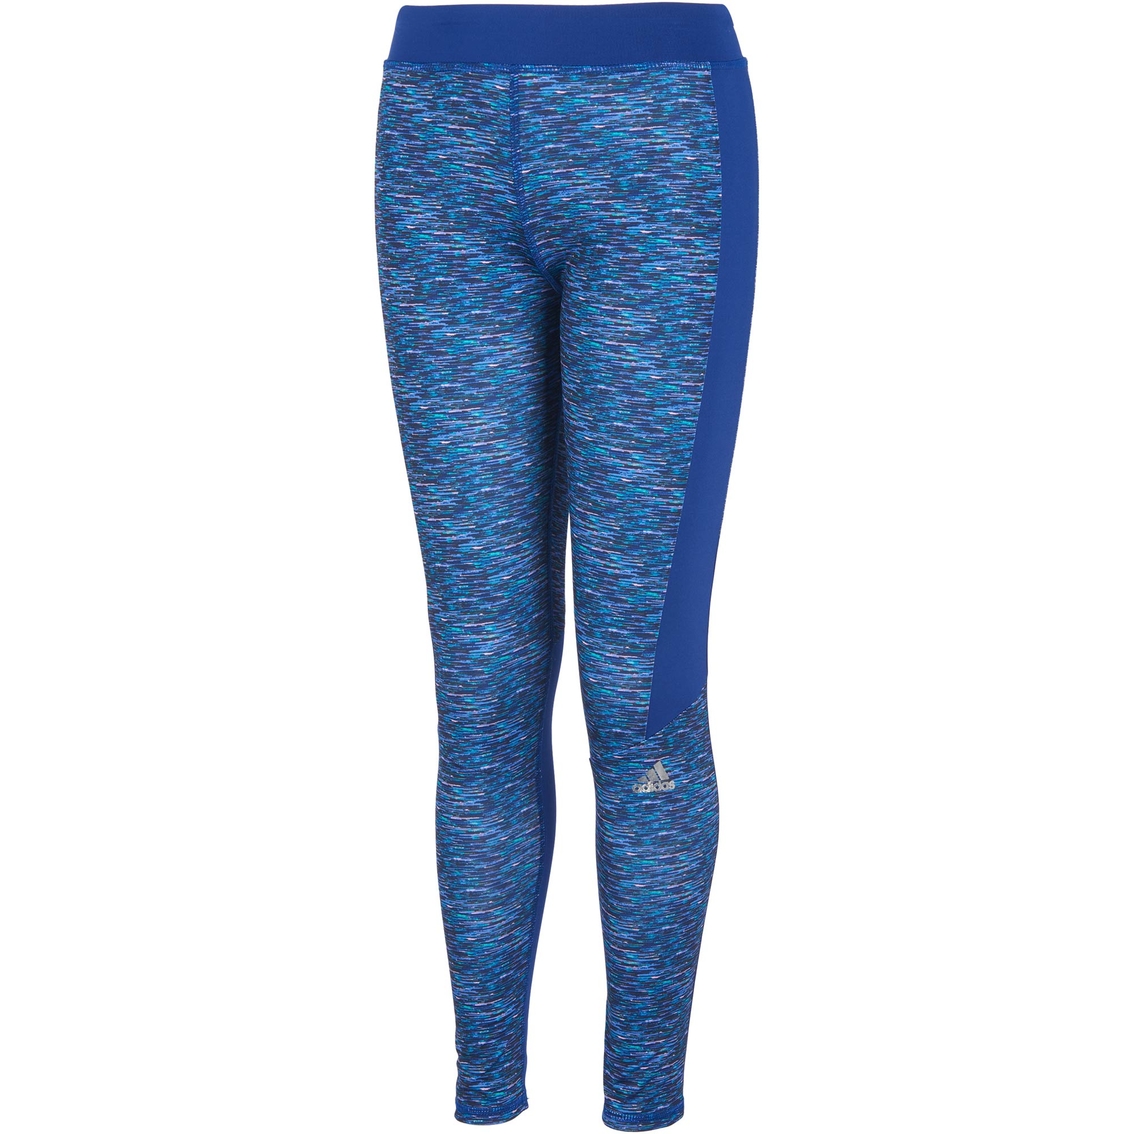 Adidas Girls Space Dye Tights | Girls 7-16 | Clothing & Accessories ...